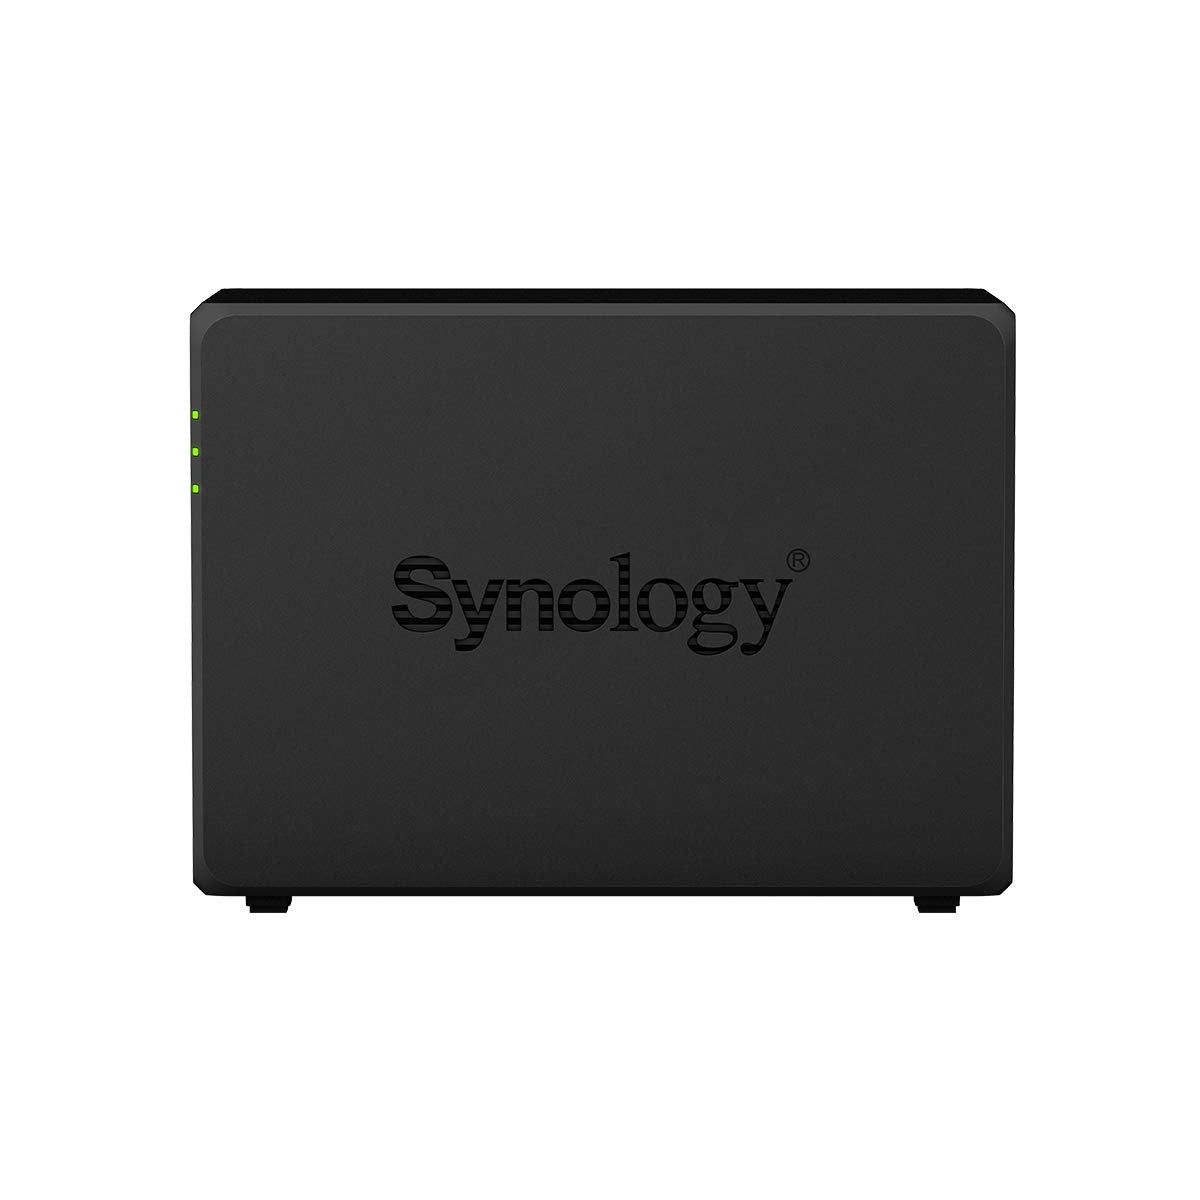 Synology DiskStation DS720+ Network Attached Storage NAS Drive with Built-in M.2 SSD Slot